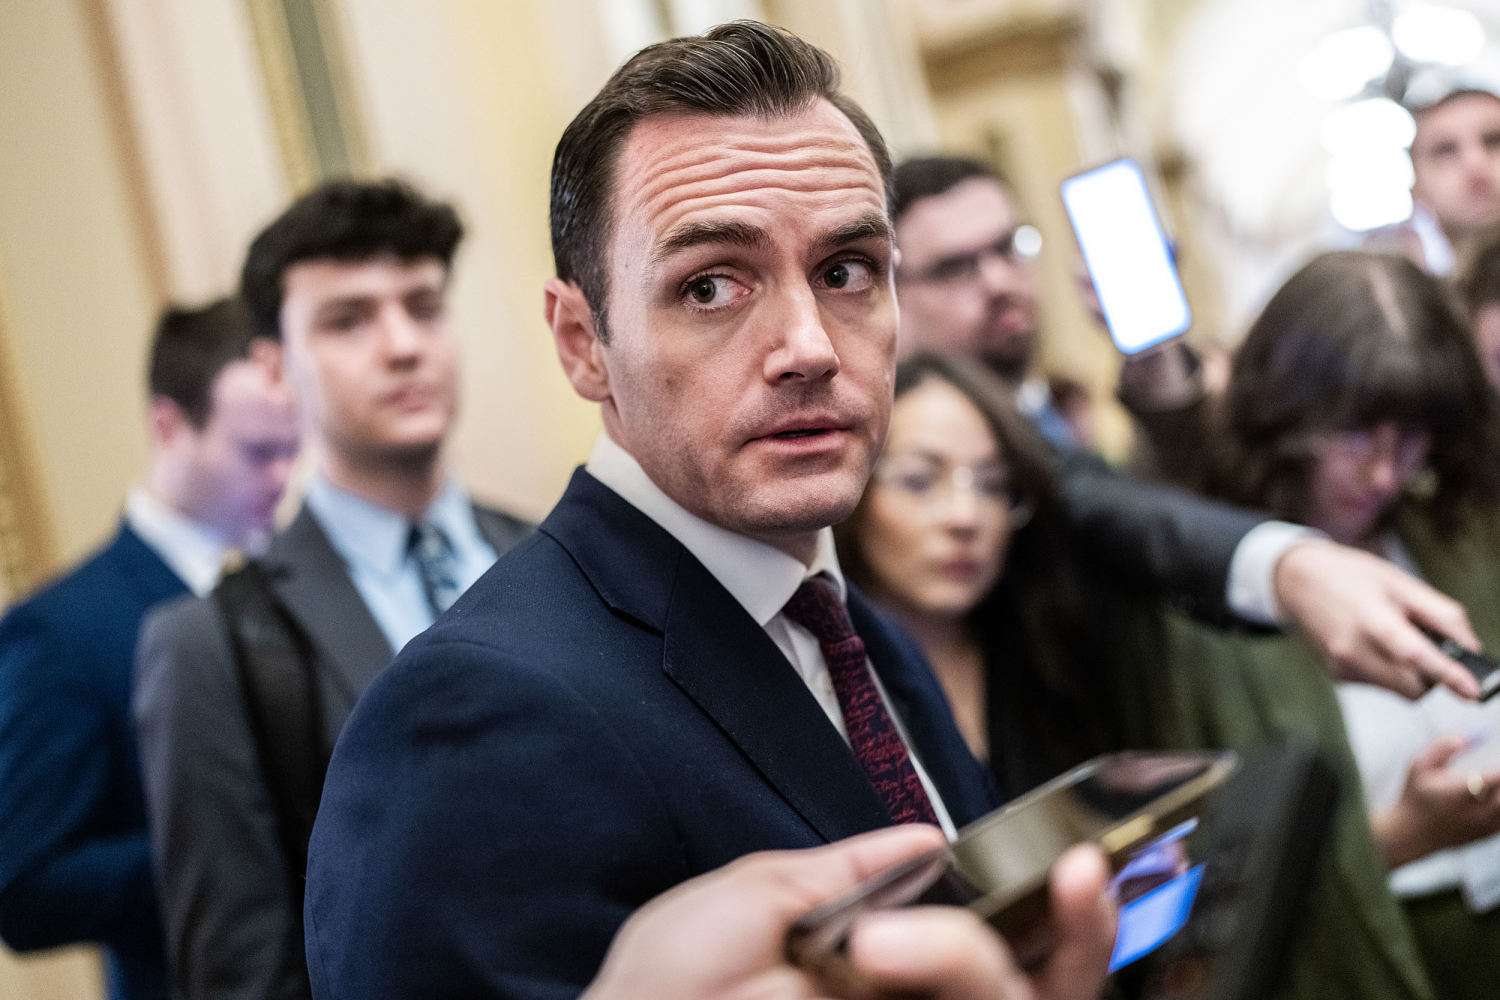 Republican Rep. Mike Gallagher will resign early leaving House majority hanging by a thread